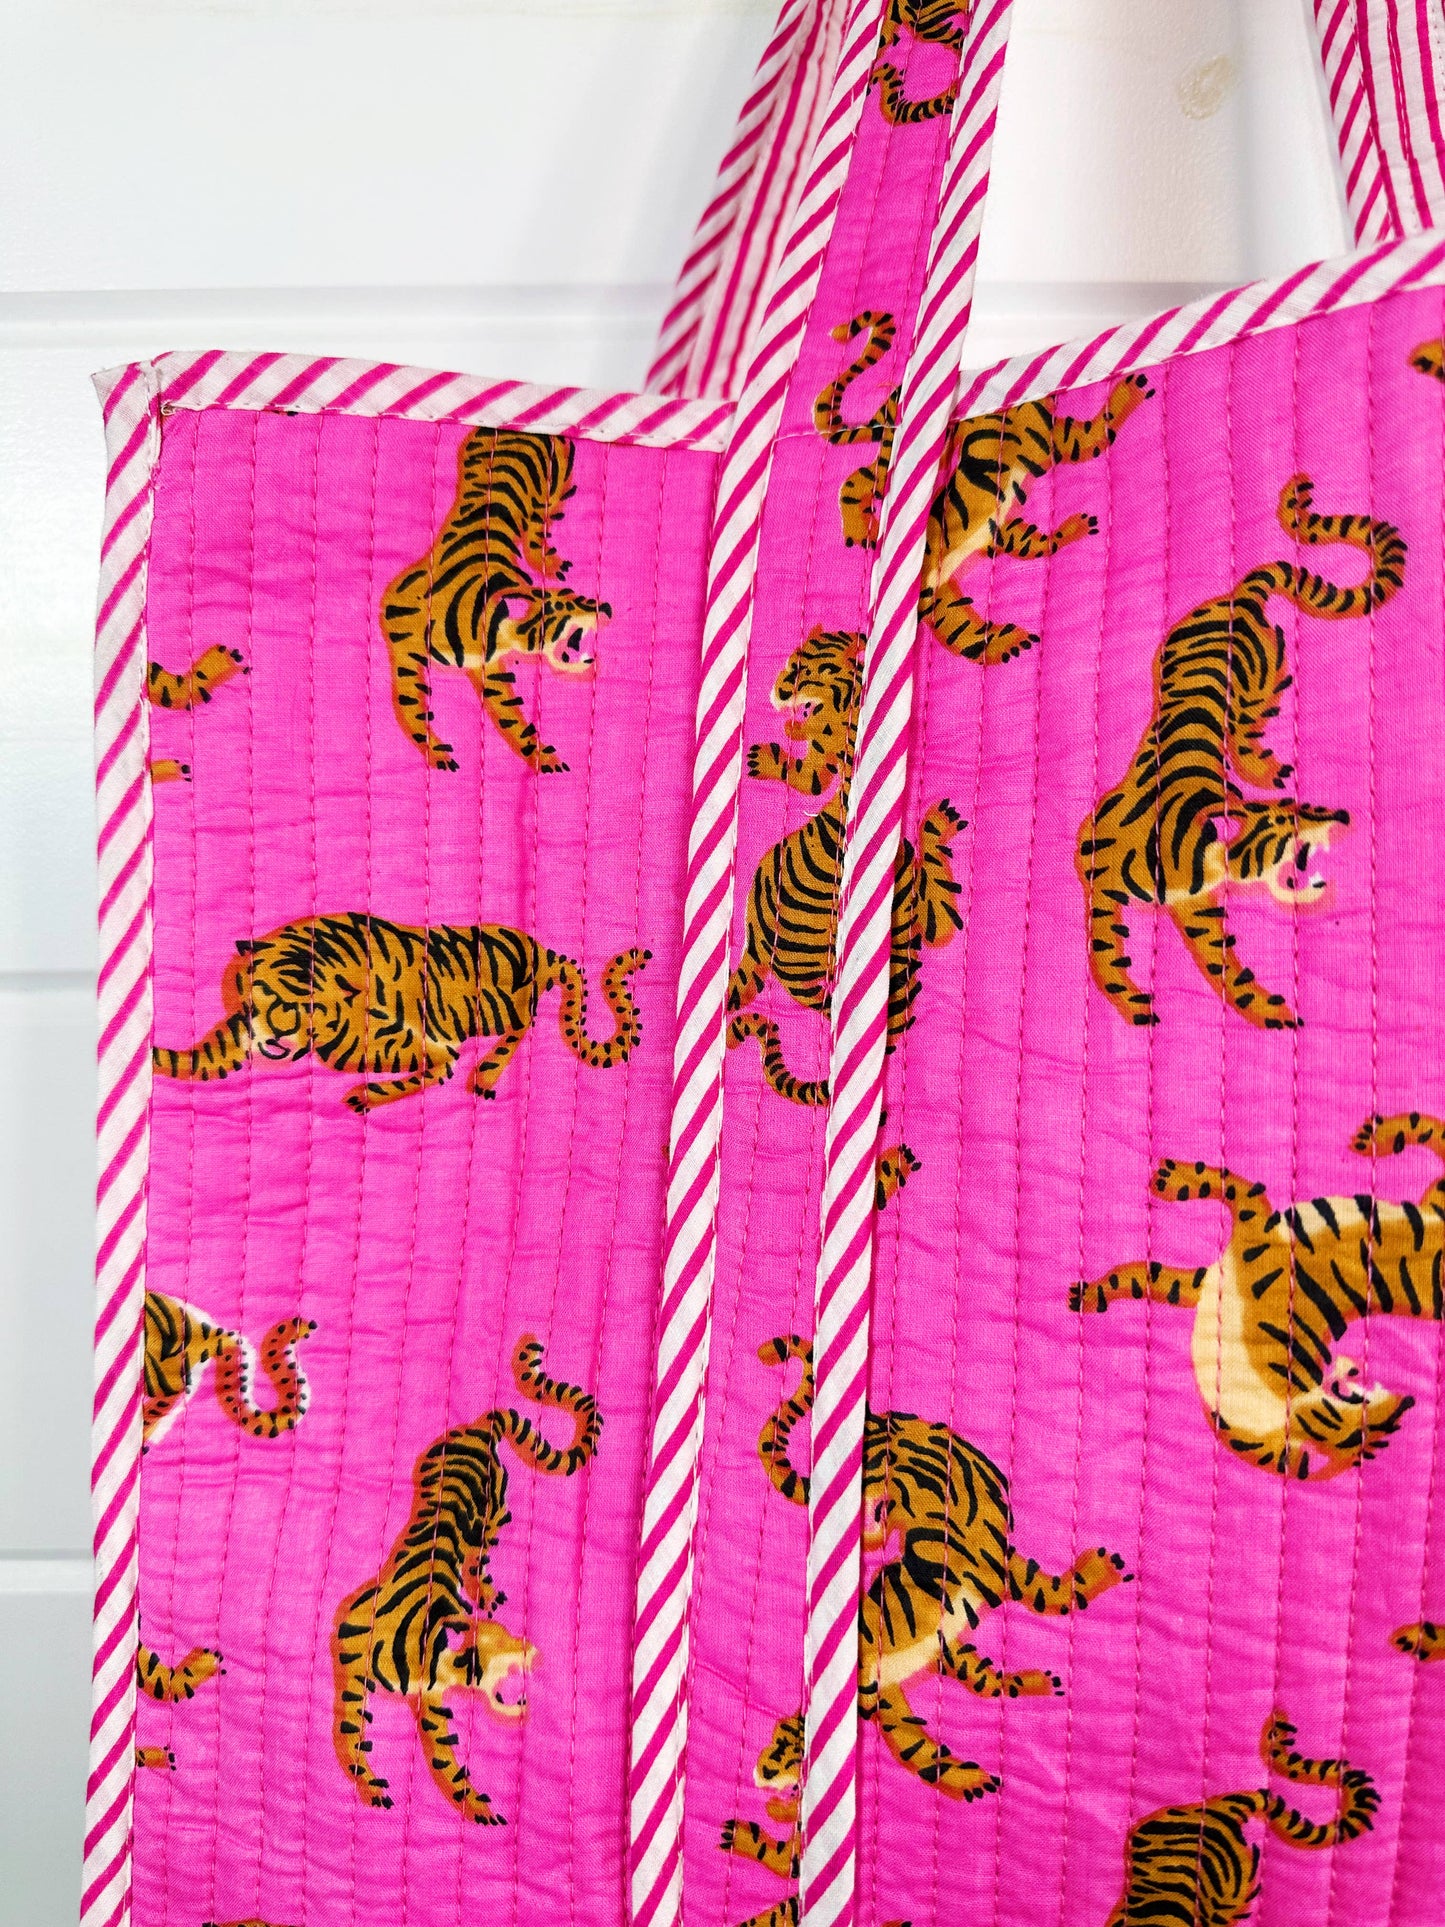 Cotton Quilted Large Shopping Tote Bag - Bright Pink Tigers